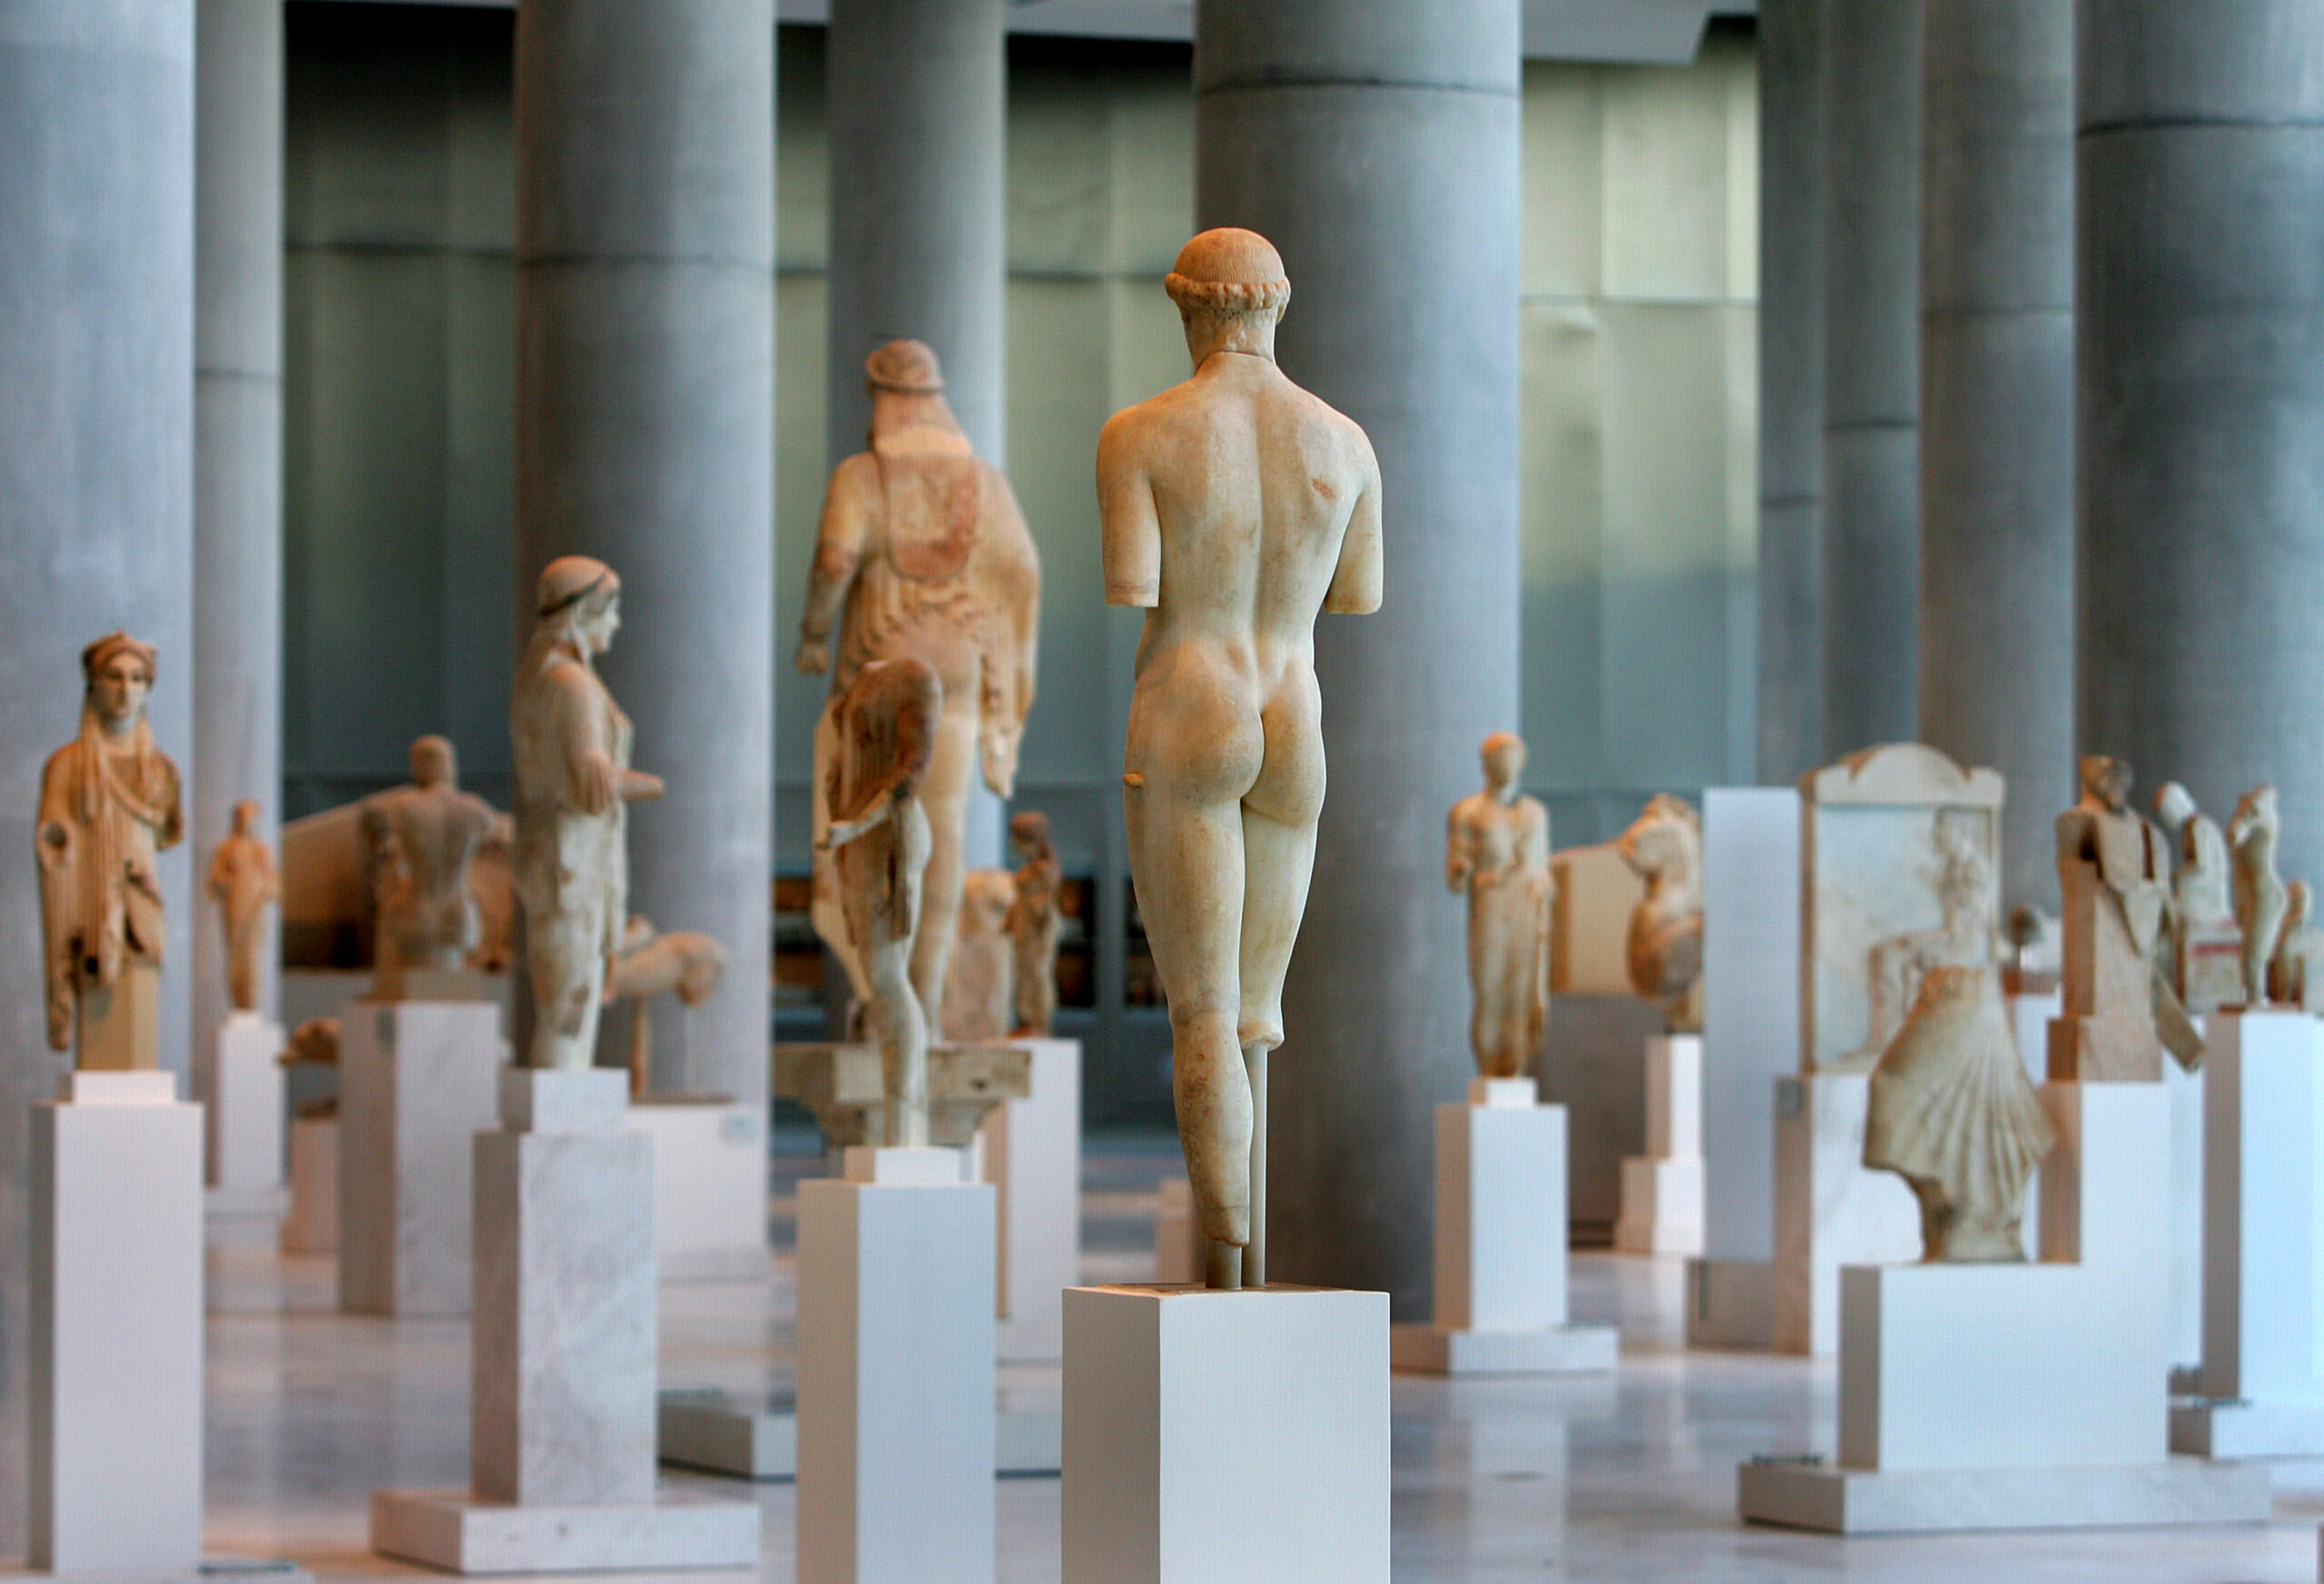 Sculptures are displayed at the Archaic Hall in the New Acropolis Museum in Athens